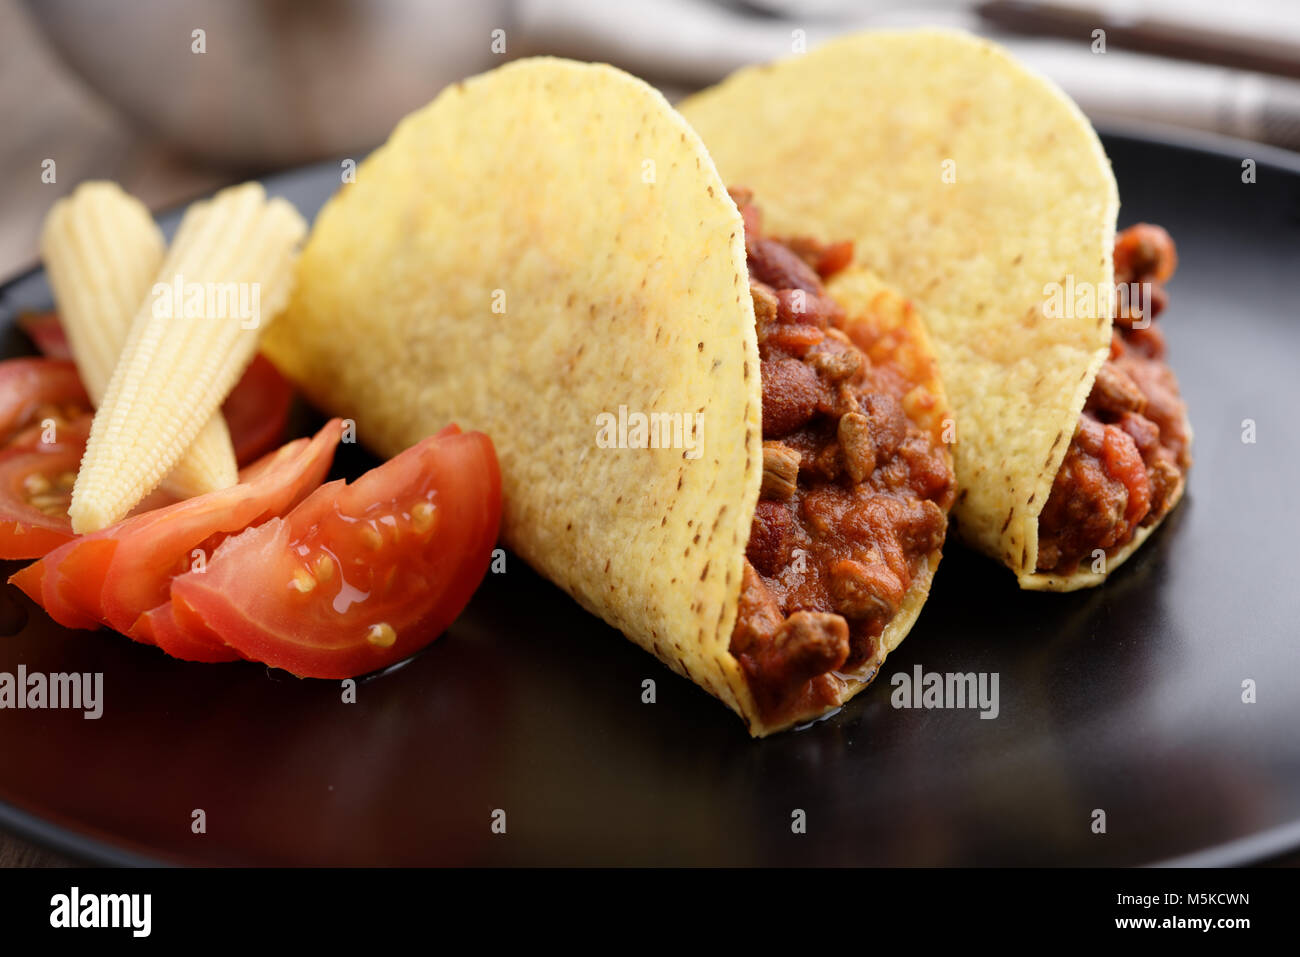 Tacos with chili con carne, tomato, and pickled baby corns Stock Photo